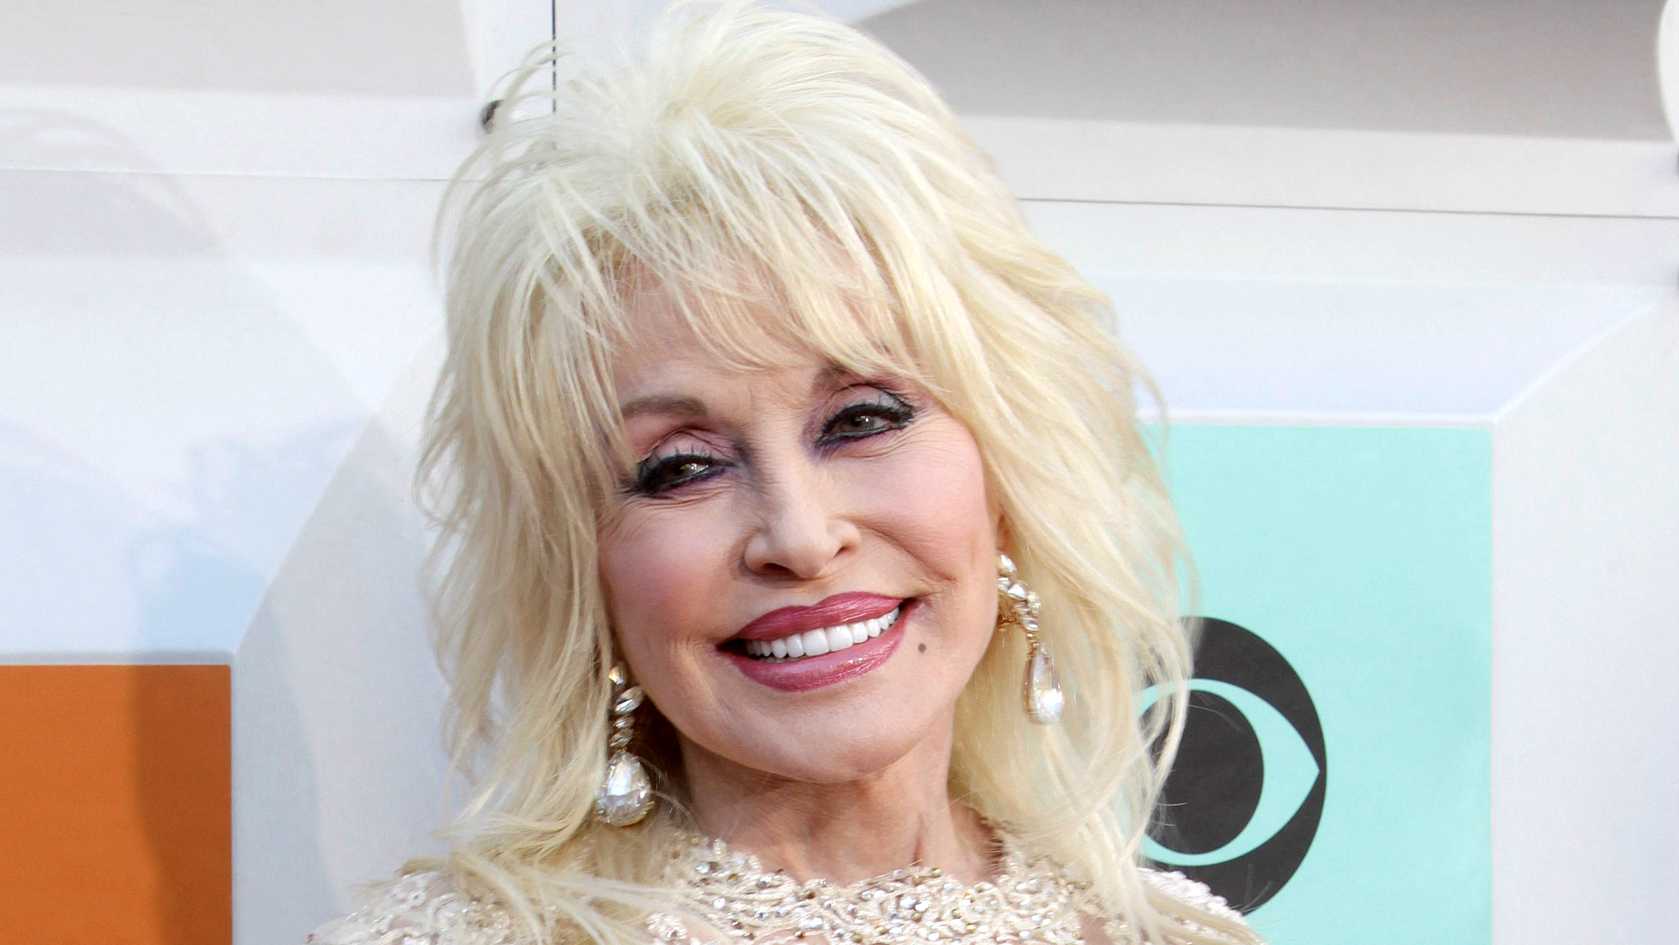 Dolly Parton to be honored in Grammy gala CGTN